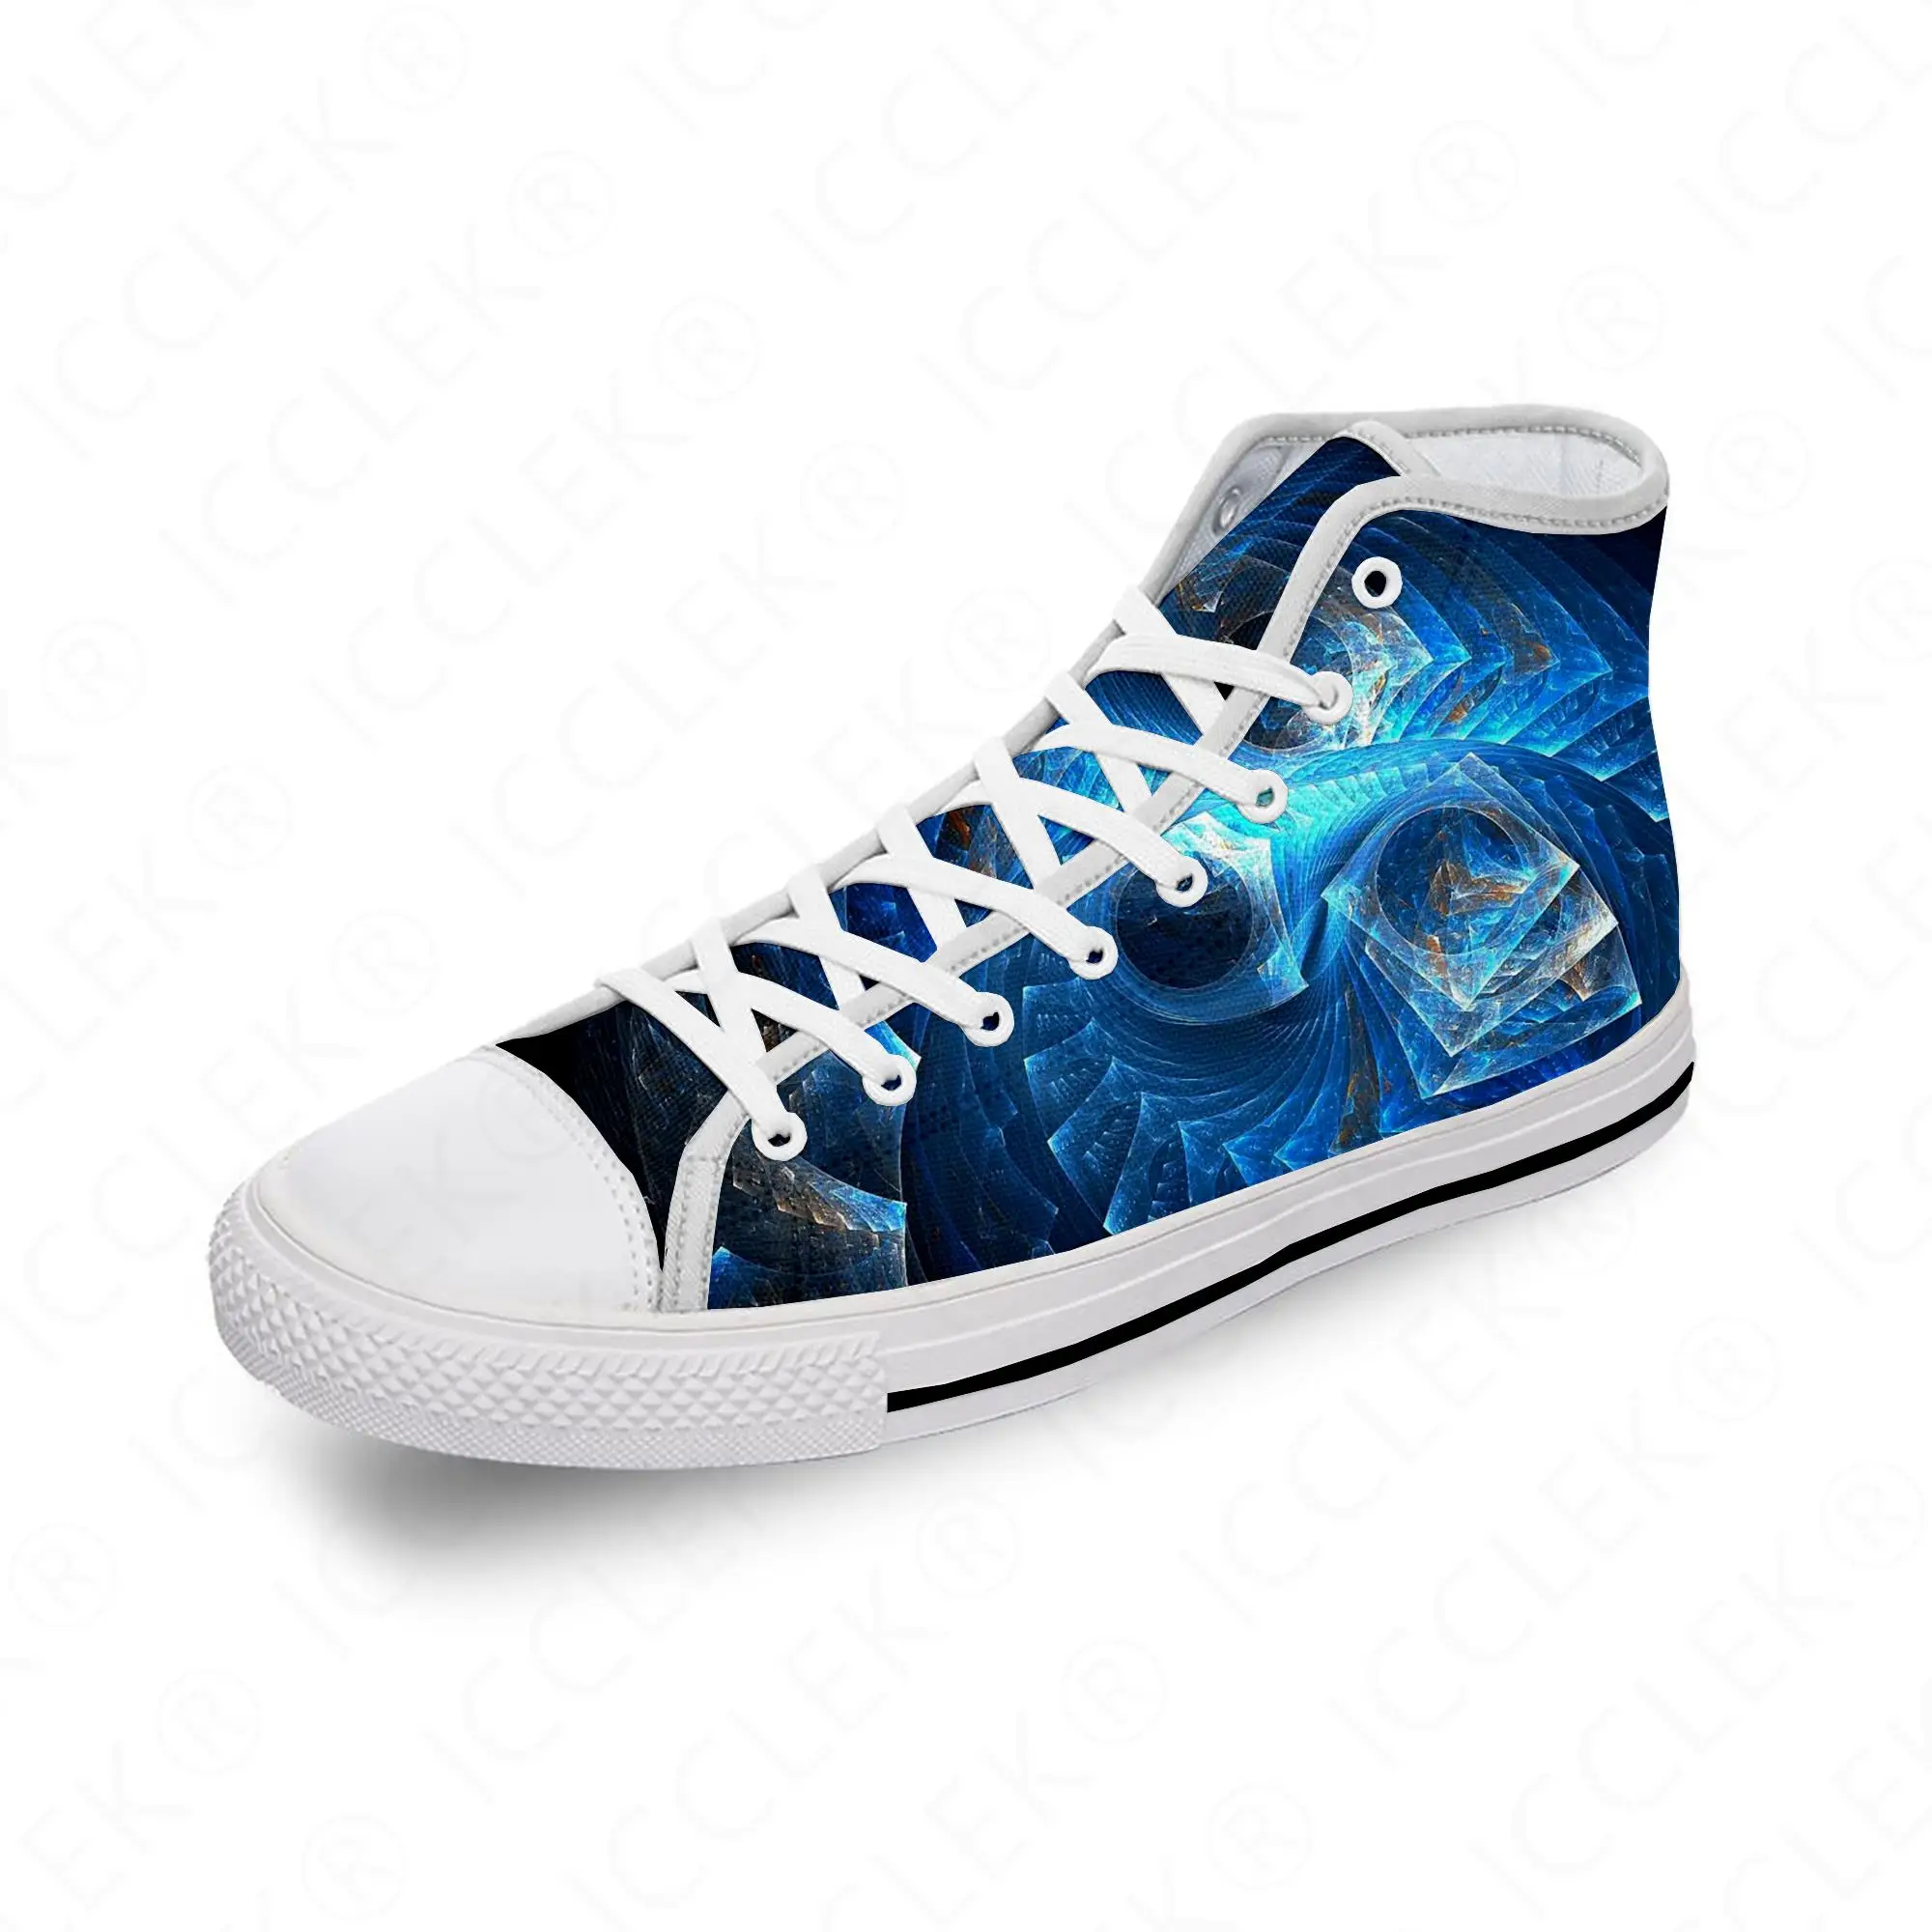 

Fractal Dawn Graphic Funny Cool White Cloth Fashion 3D Print High Top Canvas Shoes Men Women Lightweight Breathable Sneakers